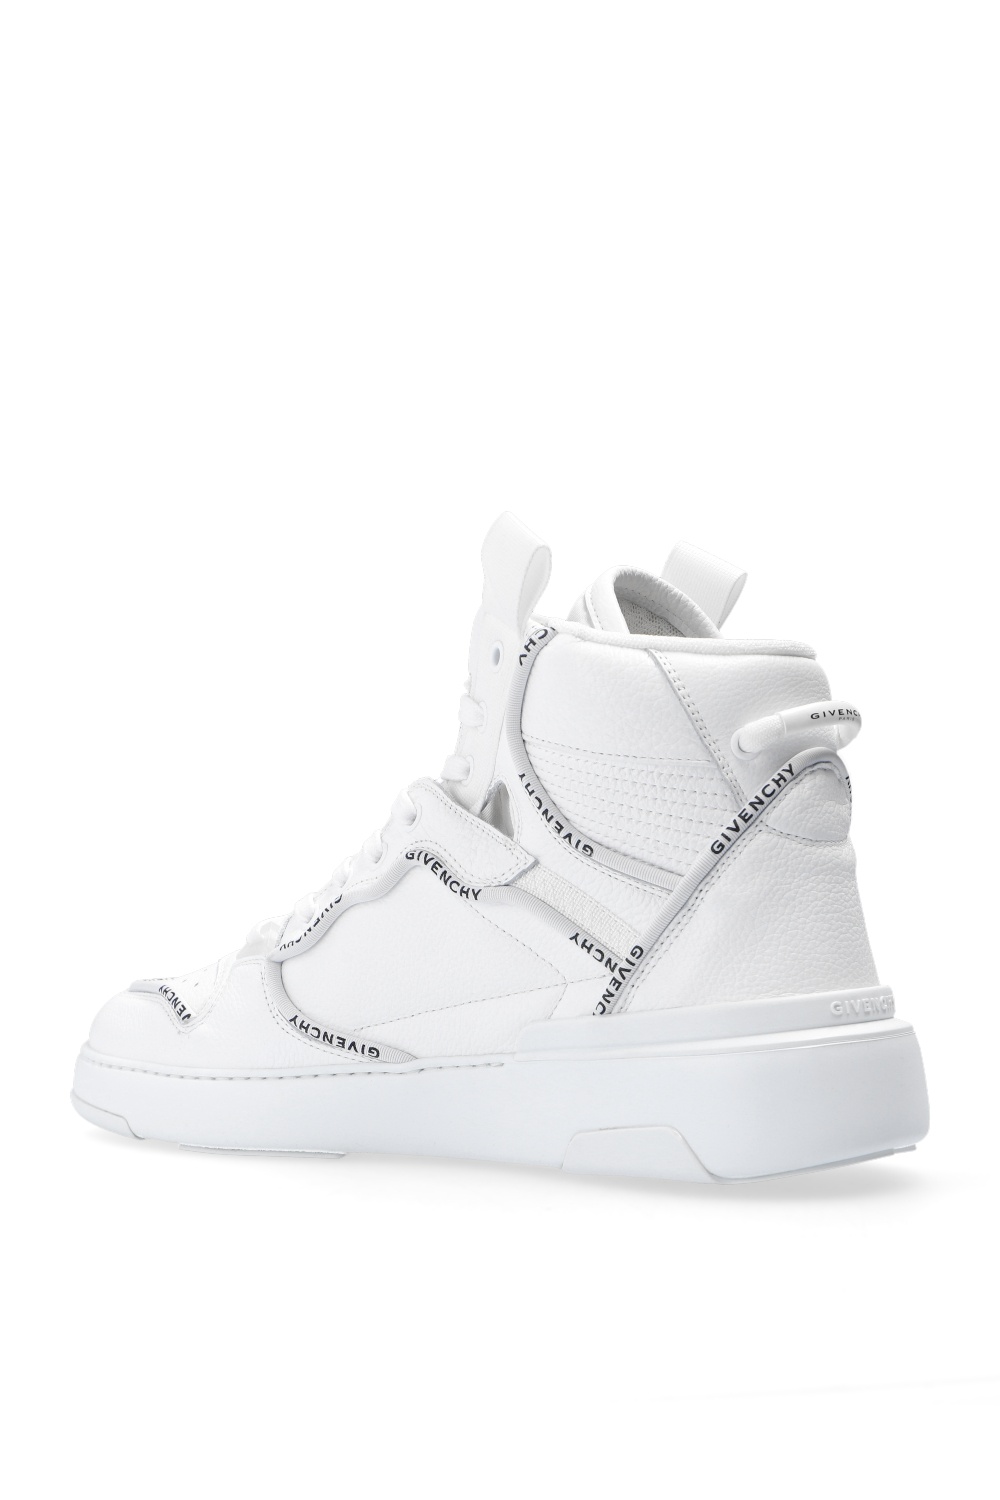 givenchy paris ‘Wing’ sneakers